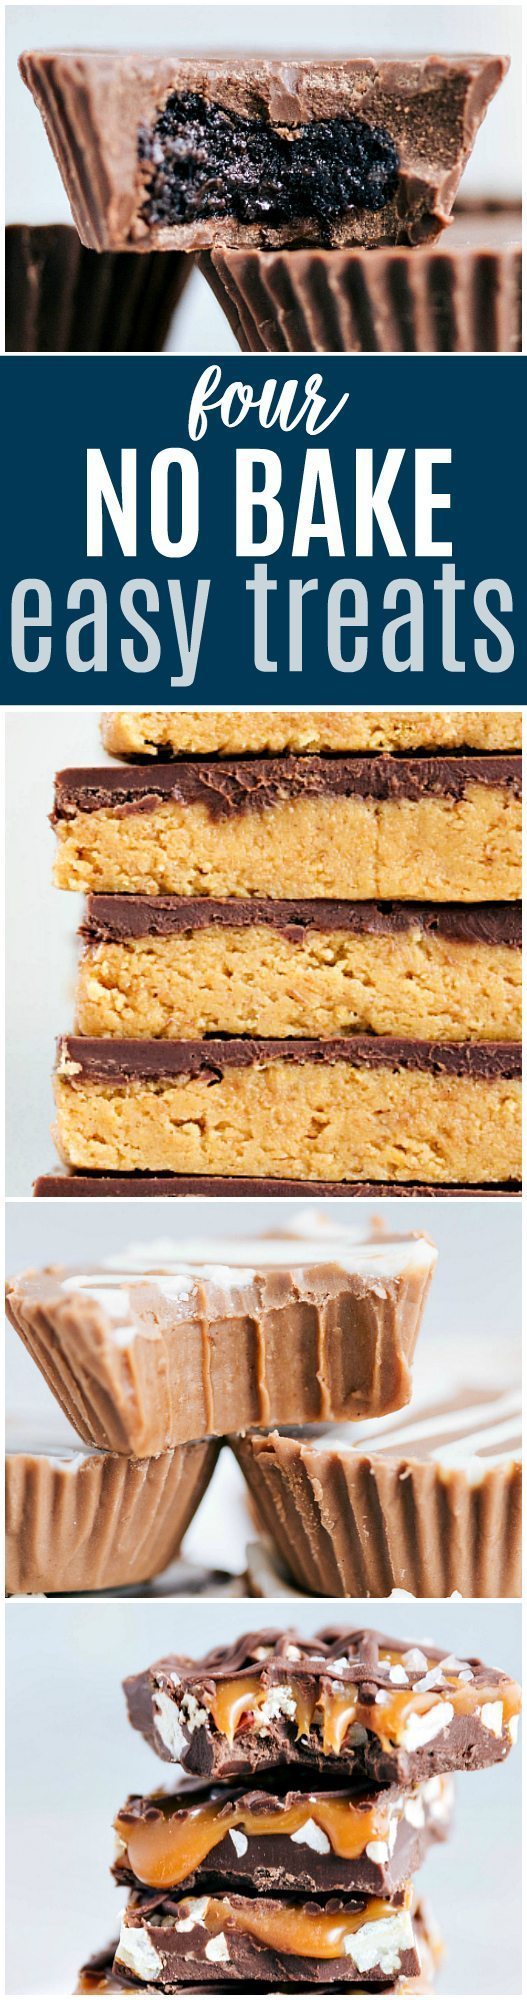 The ultimate BEST EVER easy NO BAKE treats: thin mint cups, no bake peanut butter bars, cookie butter meltaways, and turtle bars via chelseasmessyapron.com | #nobake #dessert #treat #easy #quick #few #ingredients #bake #christmas #holiday #turtle #mint #thinmint #biscoff #cookiebutter #best